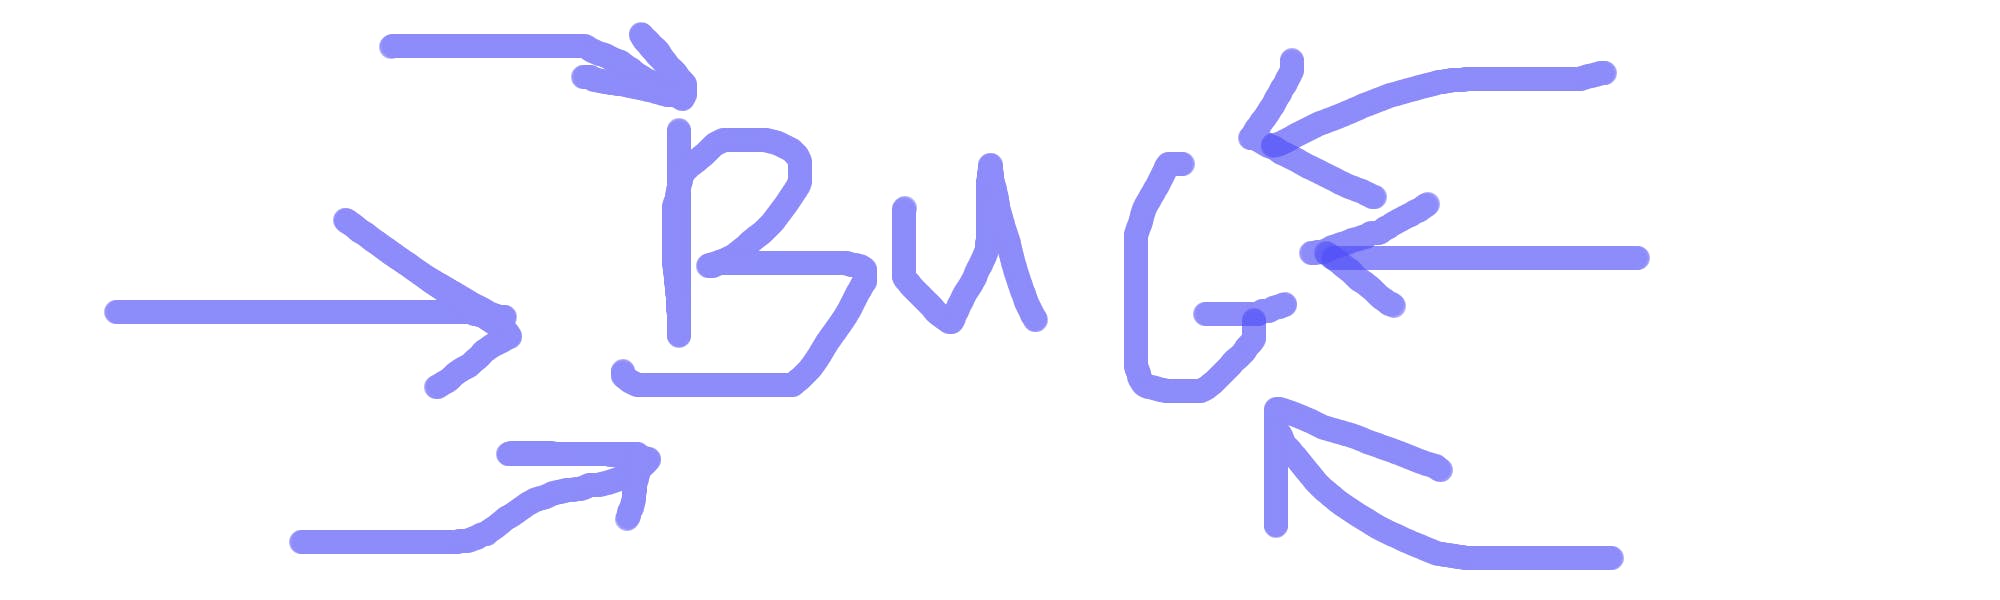 A hand-drawn word "bug" in all caps, with arrows pointing to it from all sides.